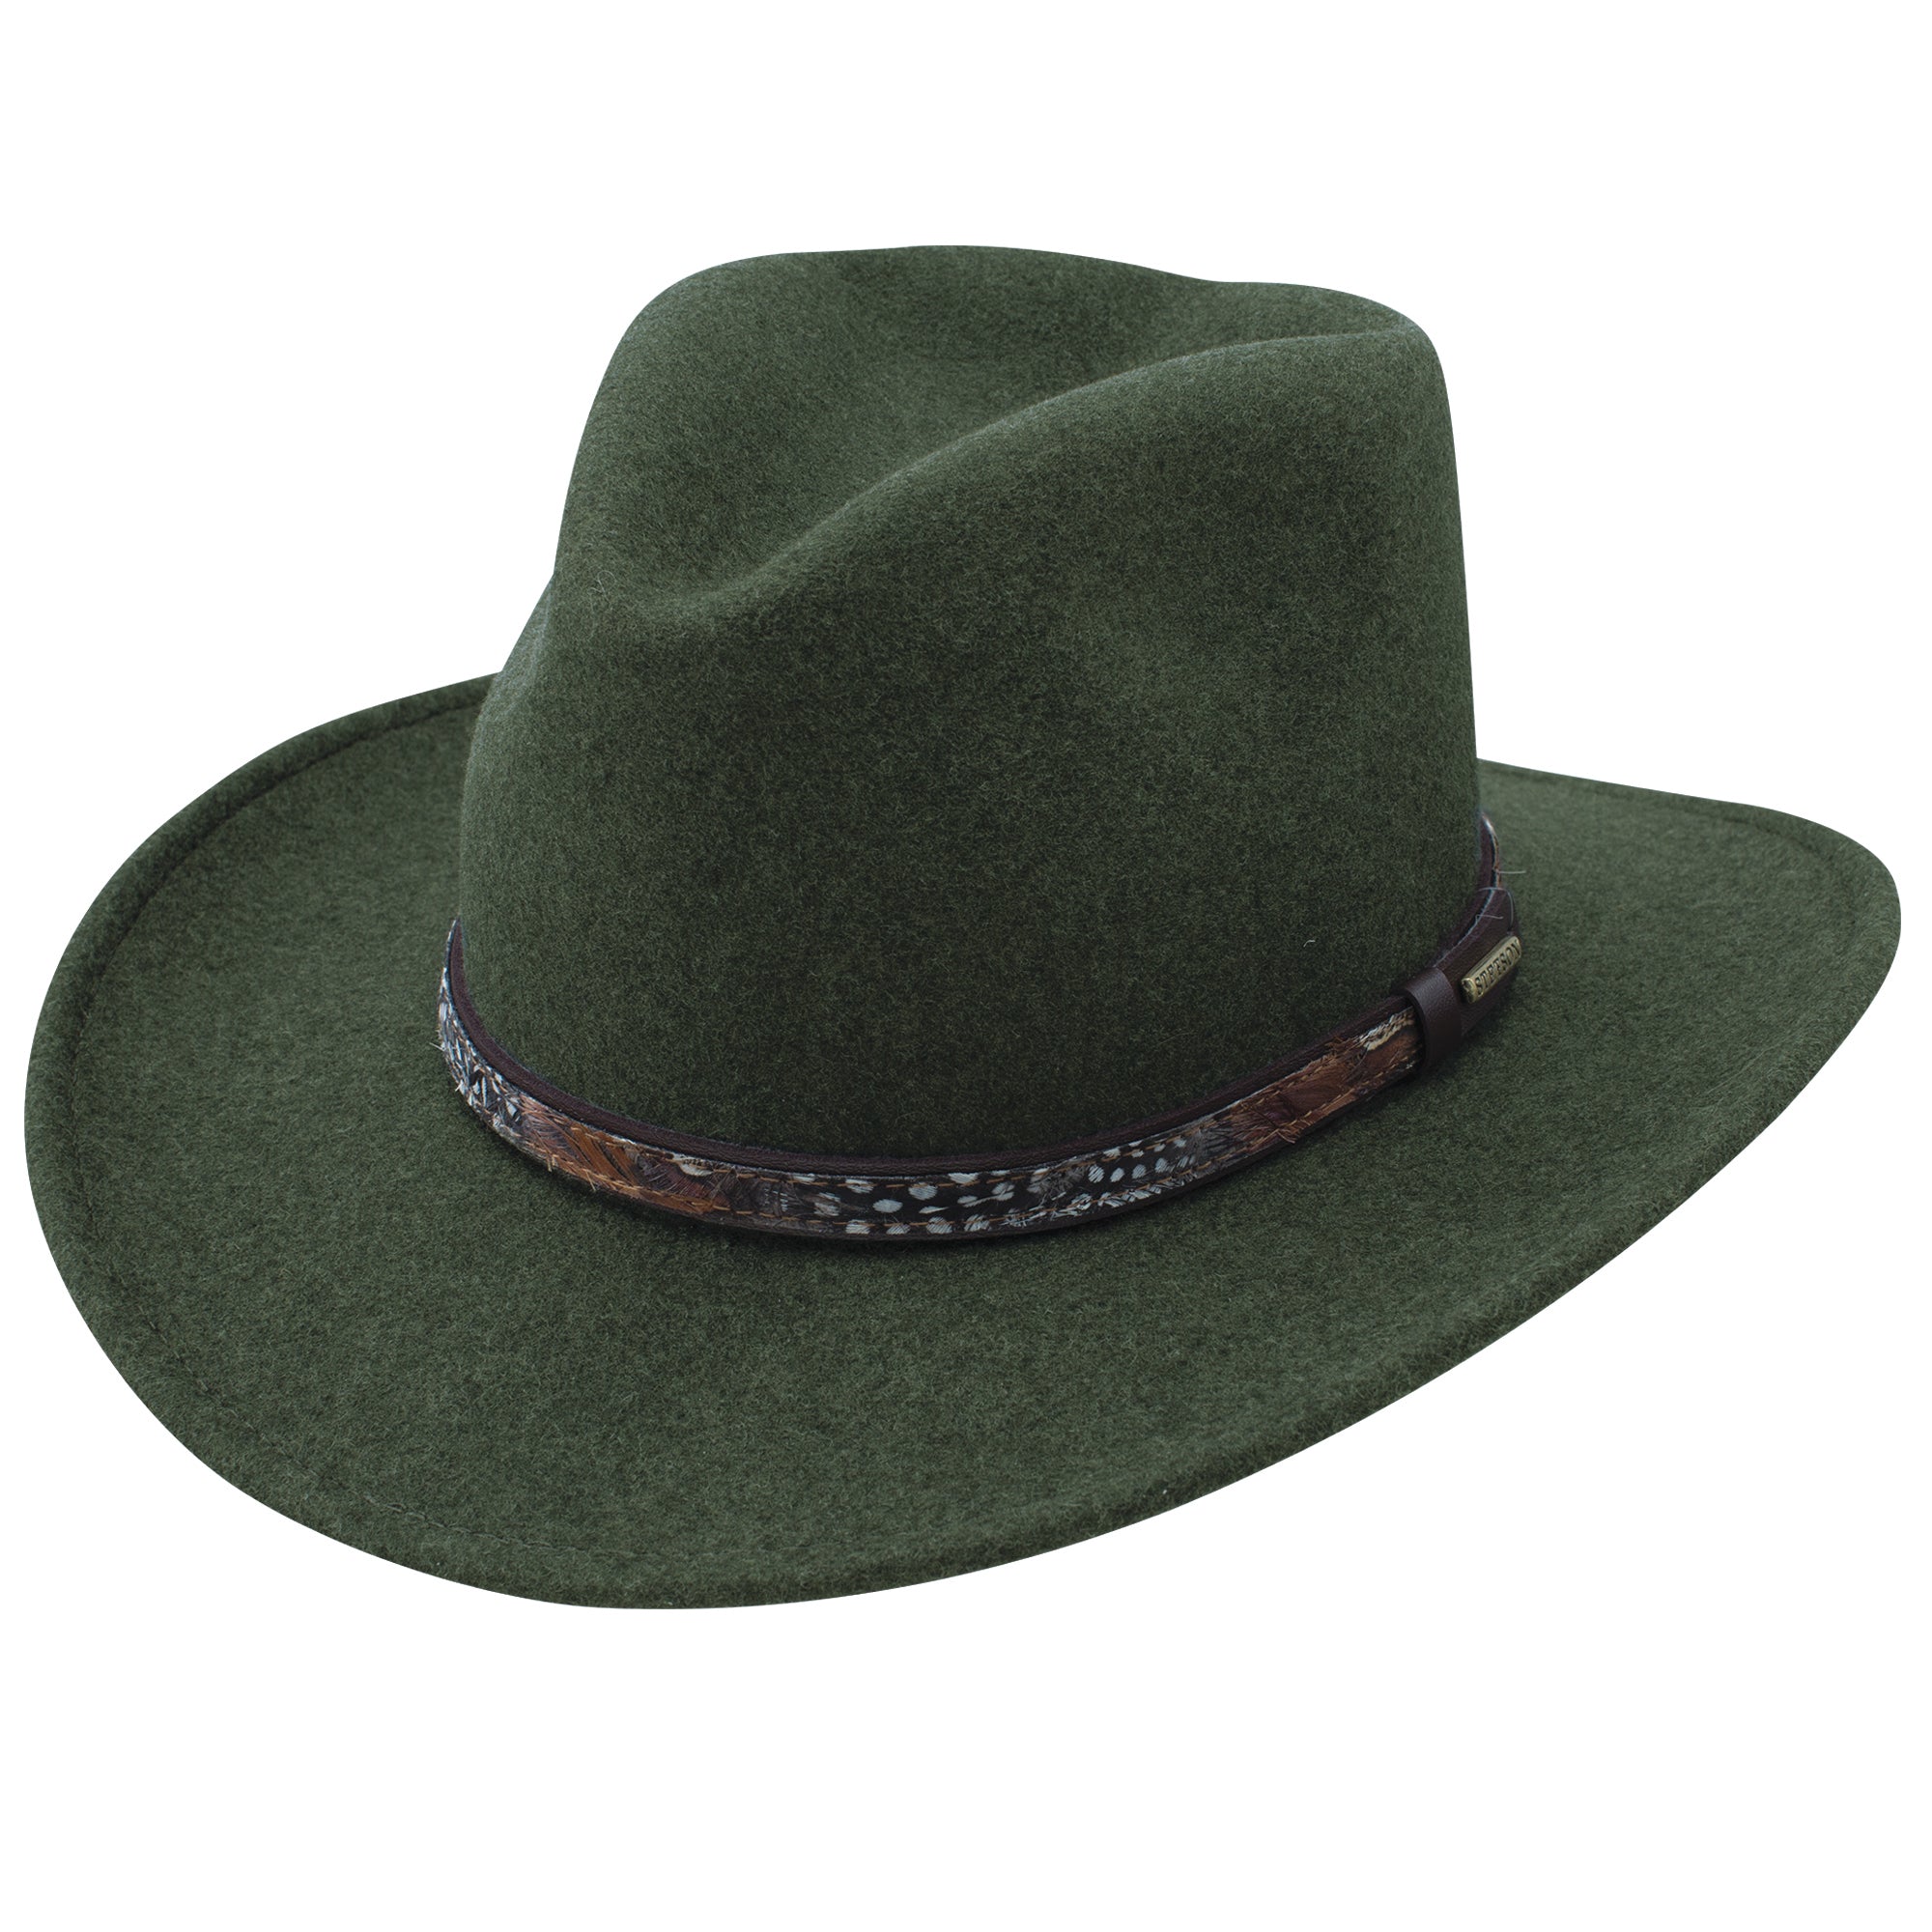 Stetson Expedition 100% Crushable Wool Hat